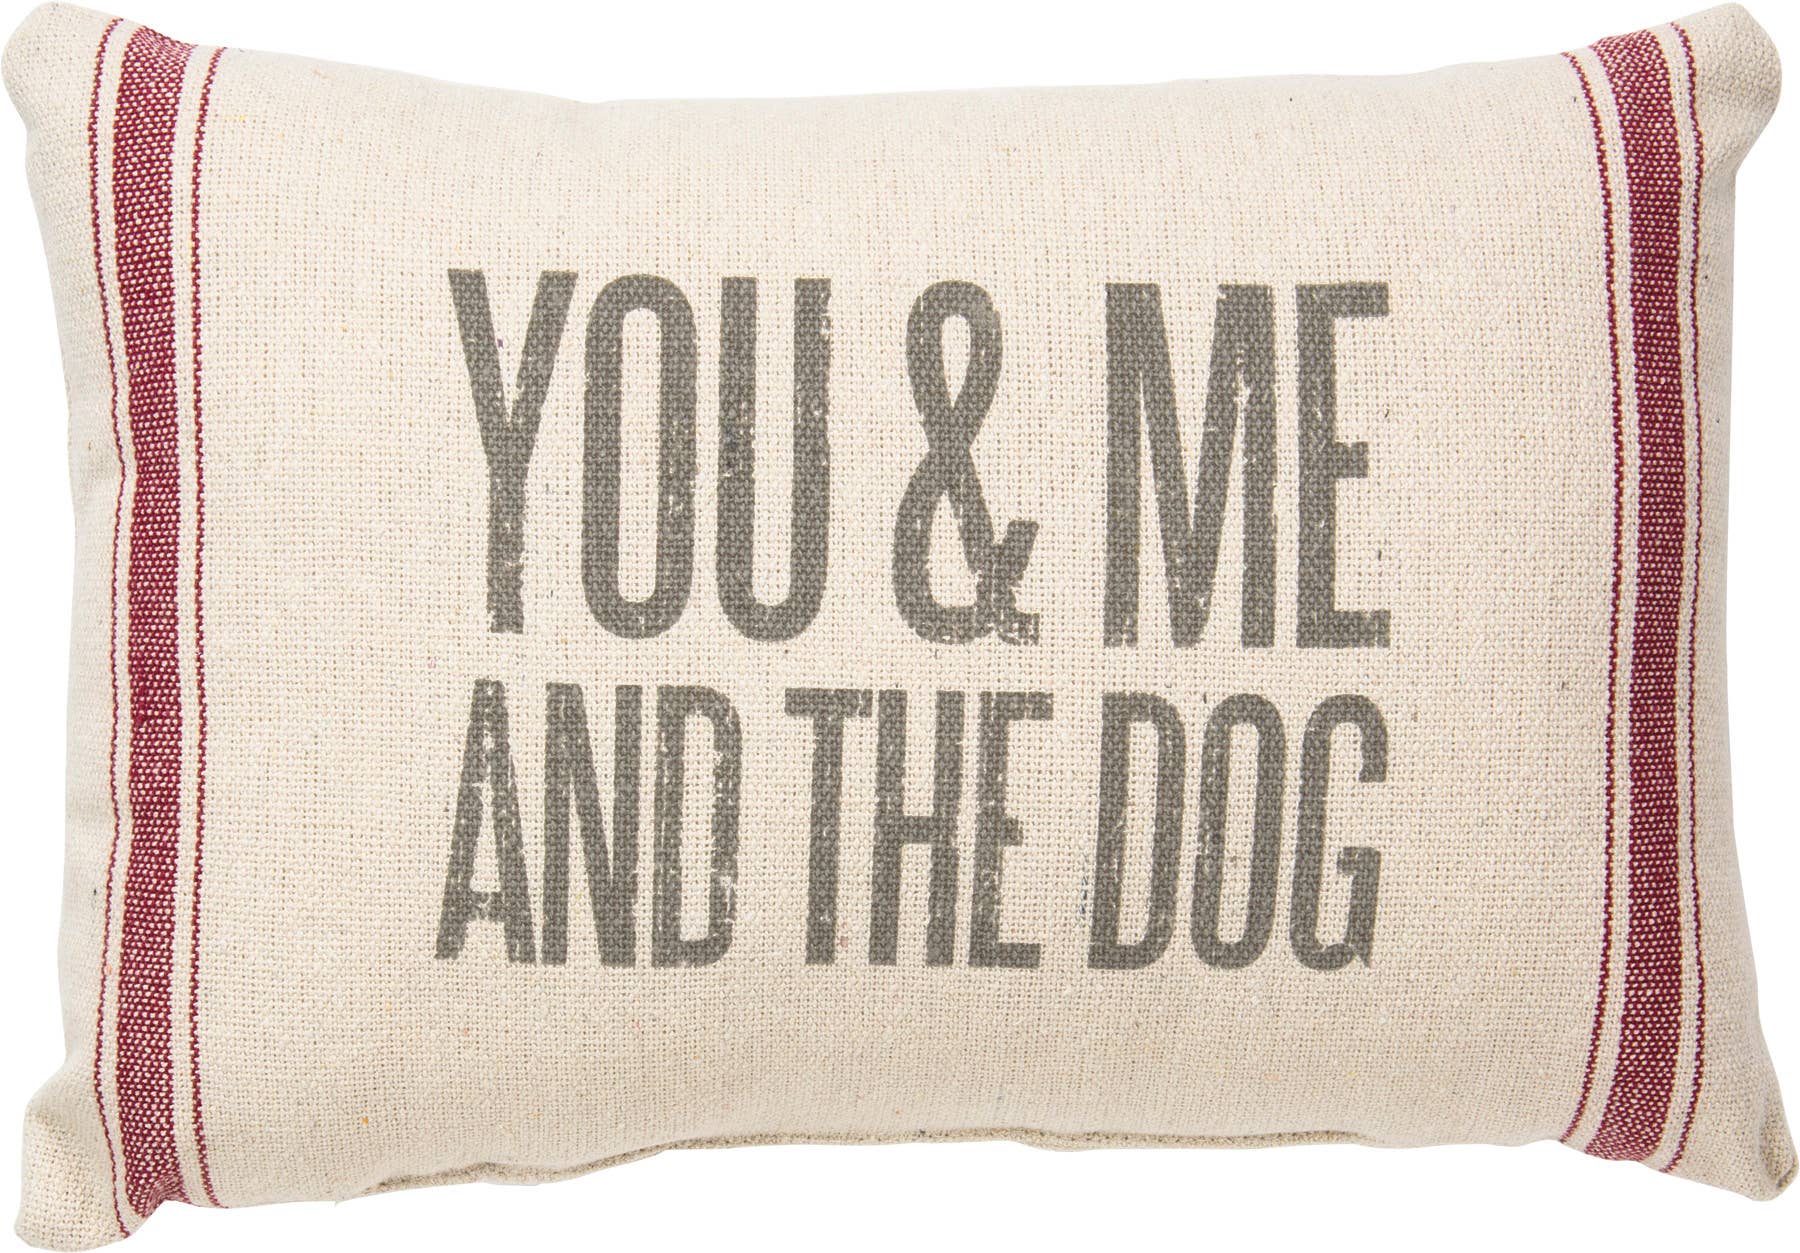 Primitives by Kathy - You & Me And The Dog Pillow